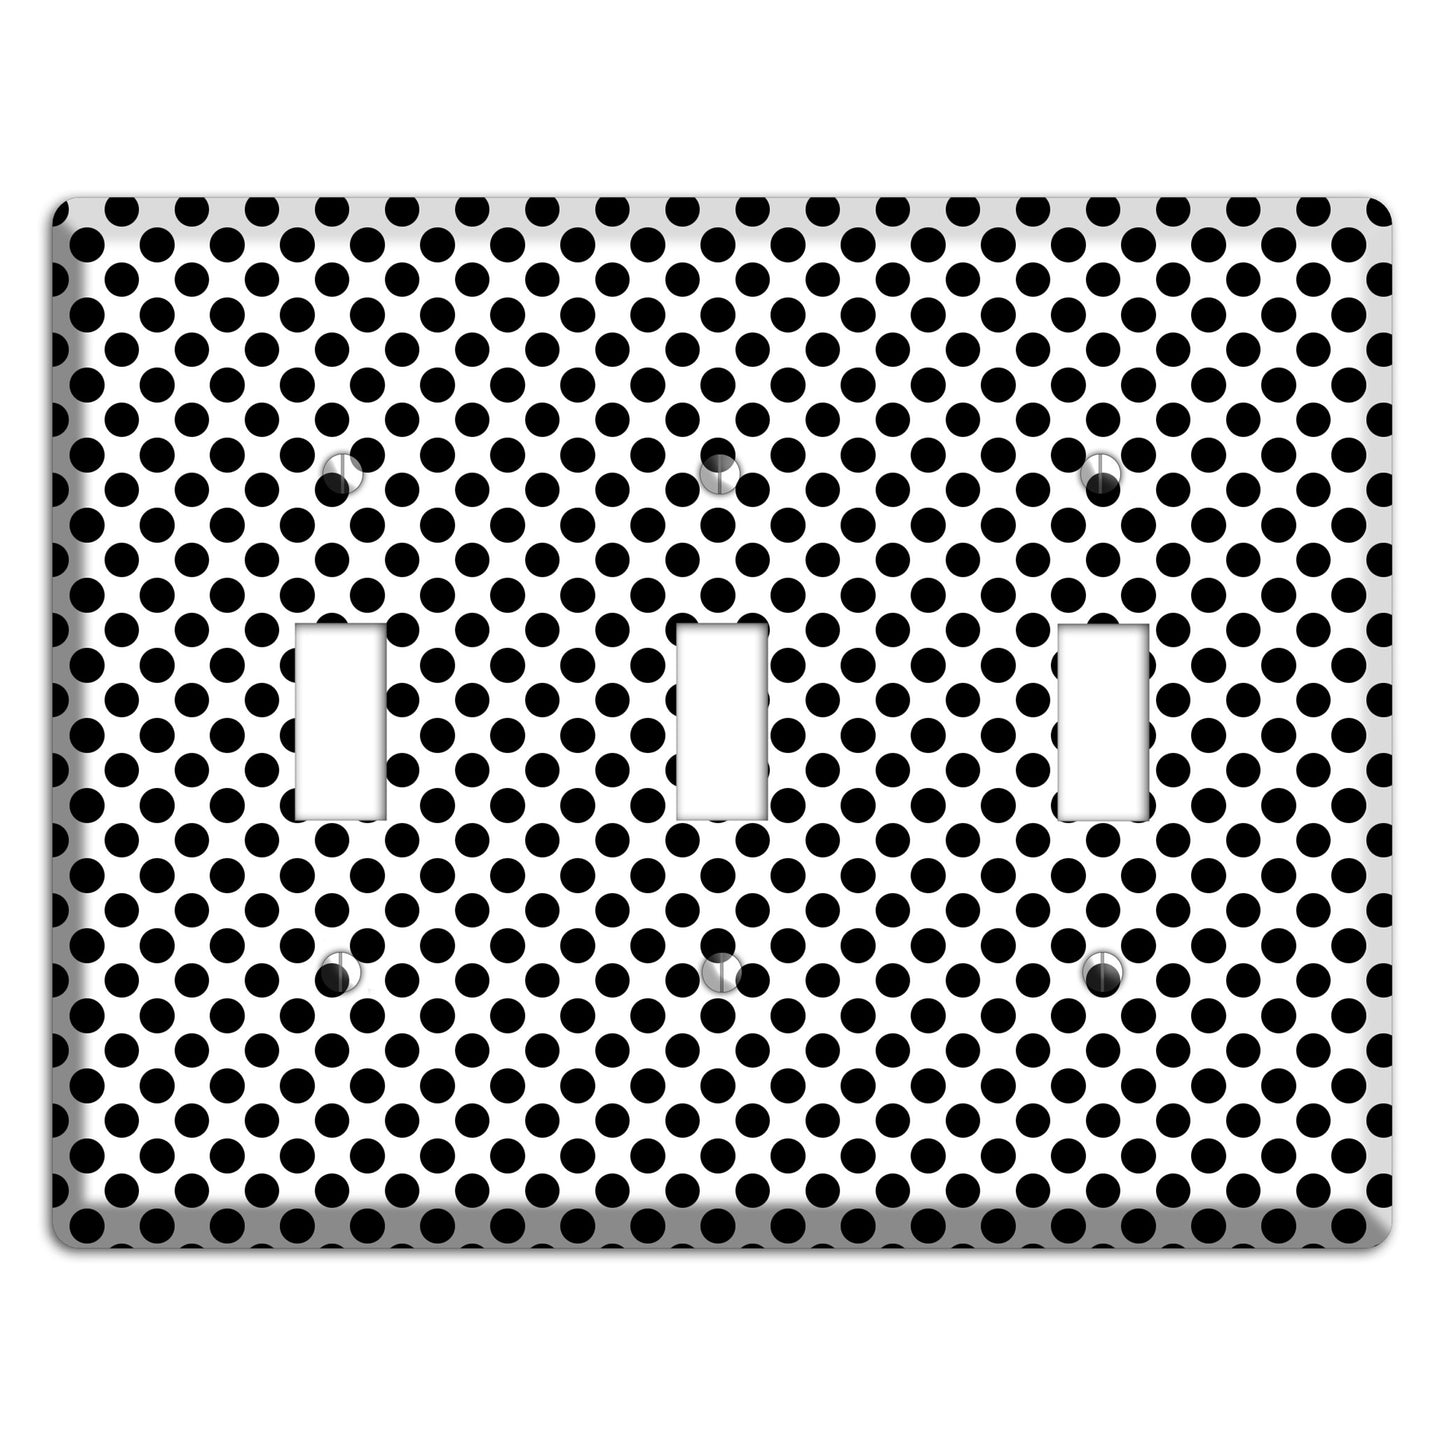 White with Black Packed Small Polka Dots 3 Toggle Wallplate